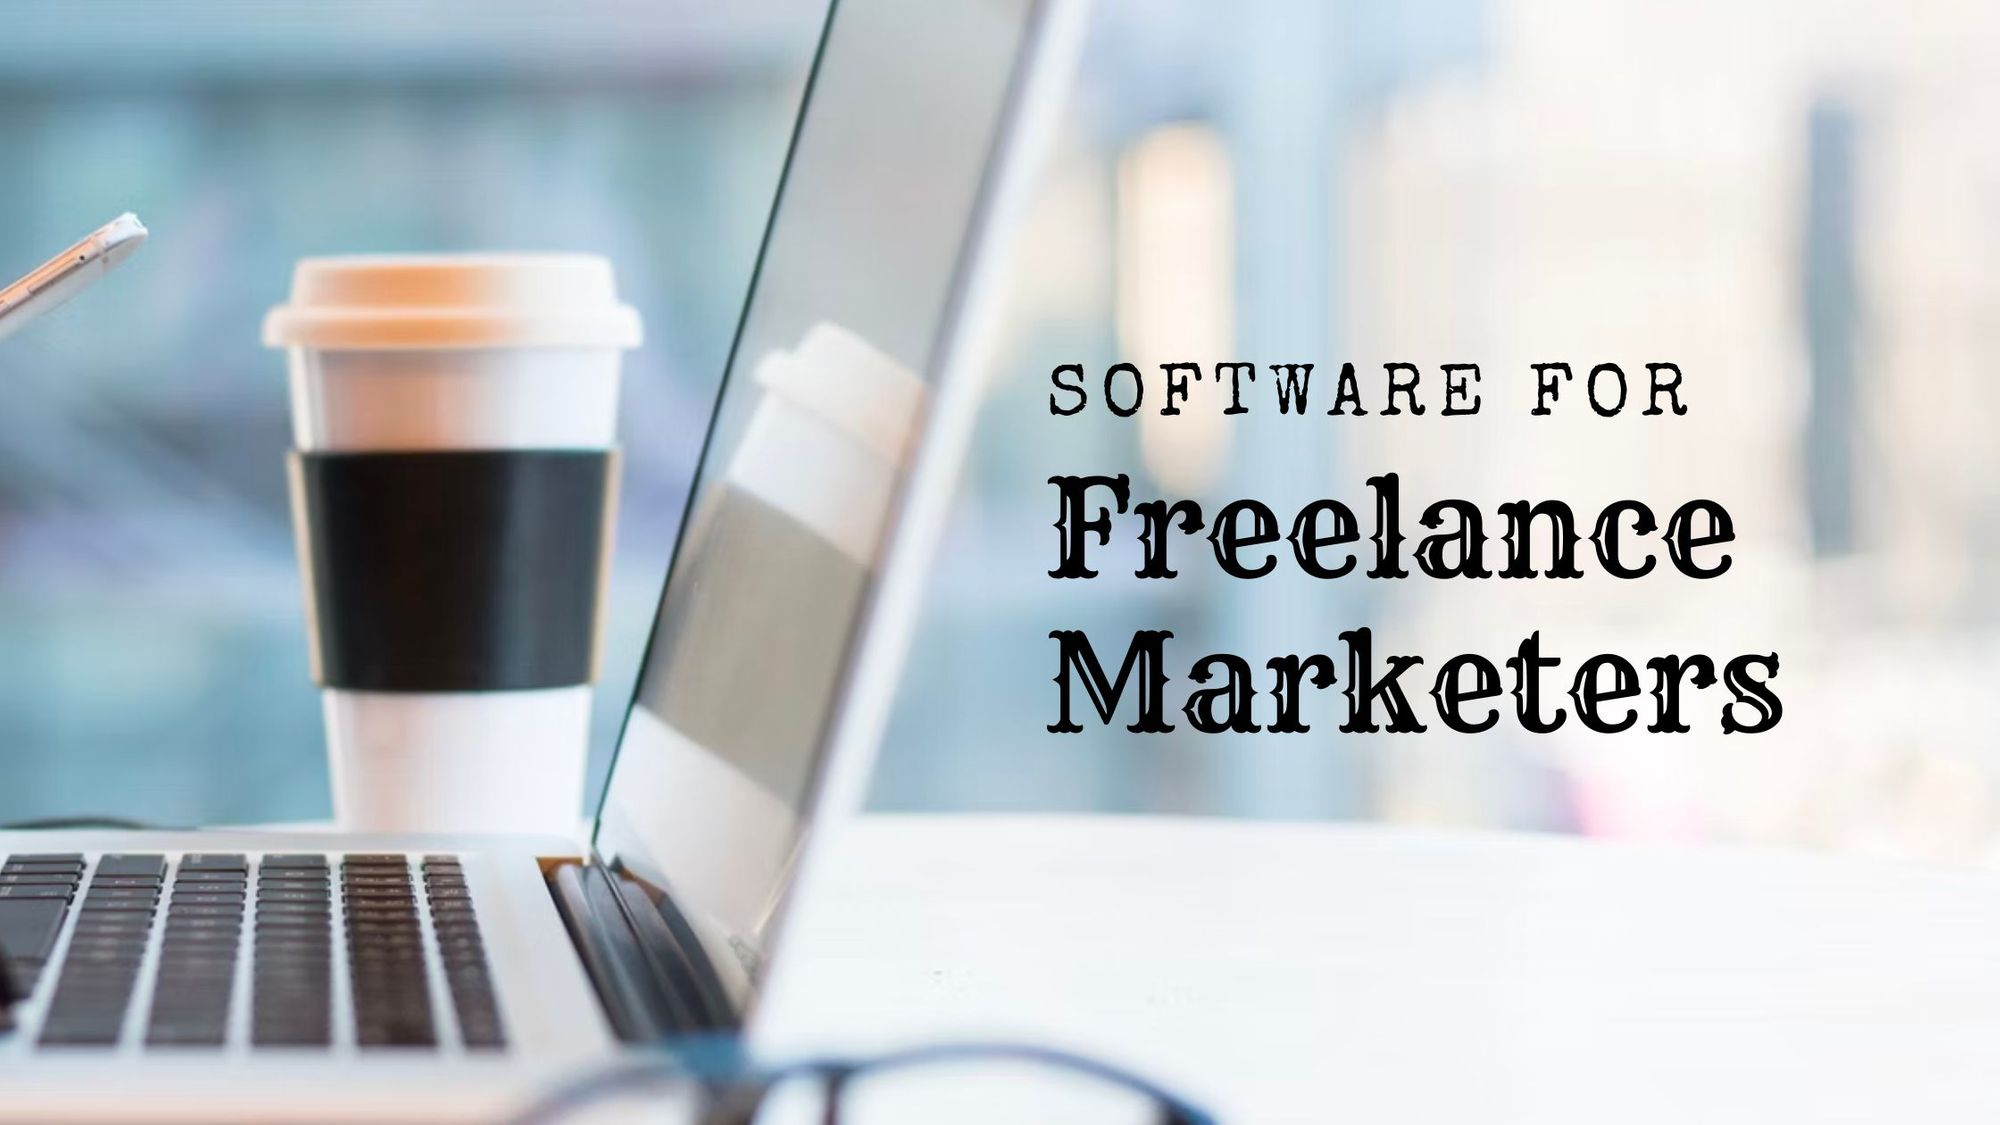 Best Software Tools for Freelance Marketers in 2022